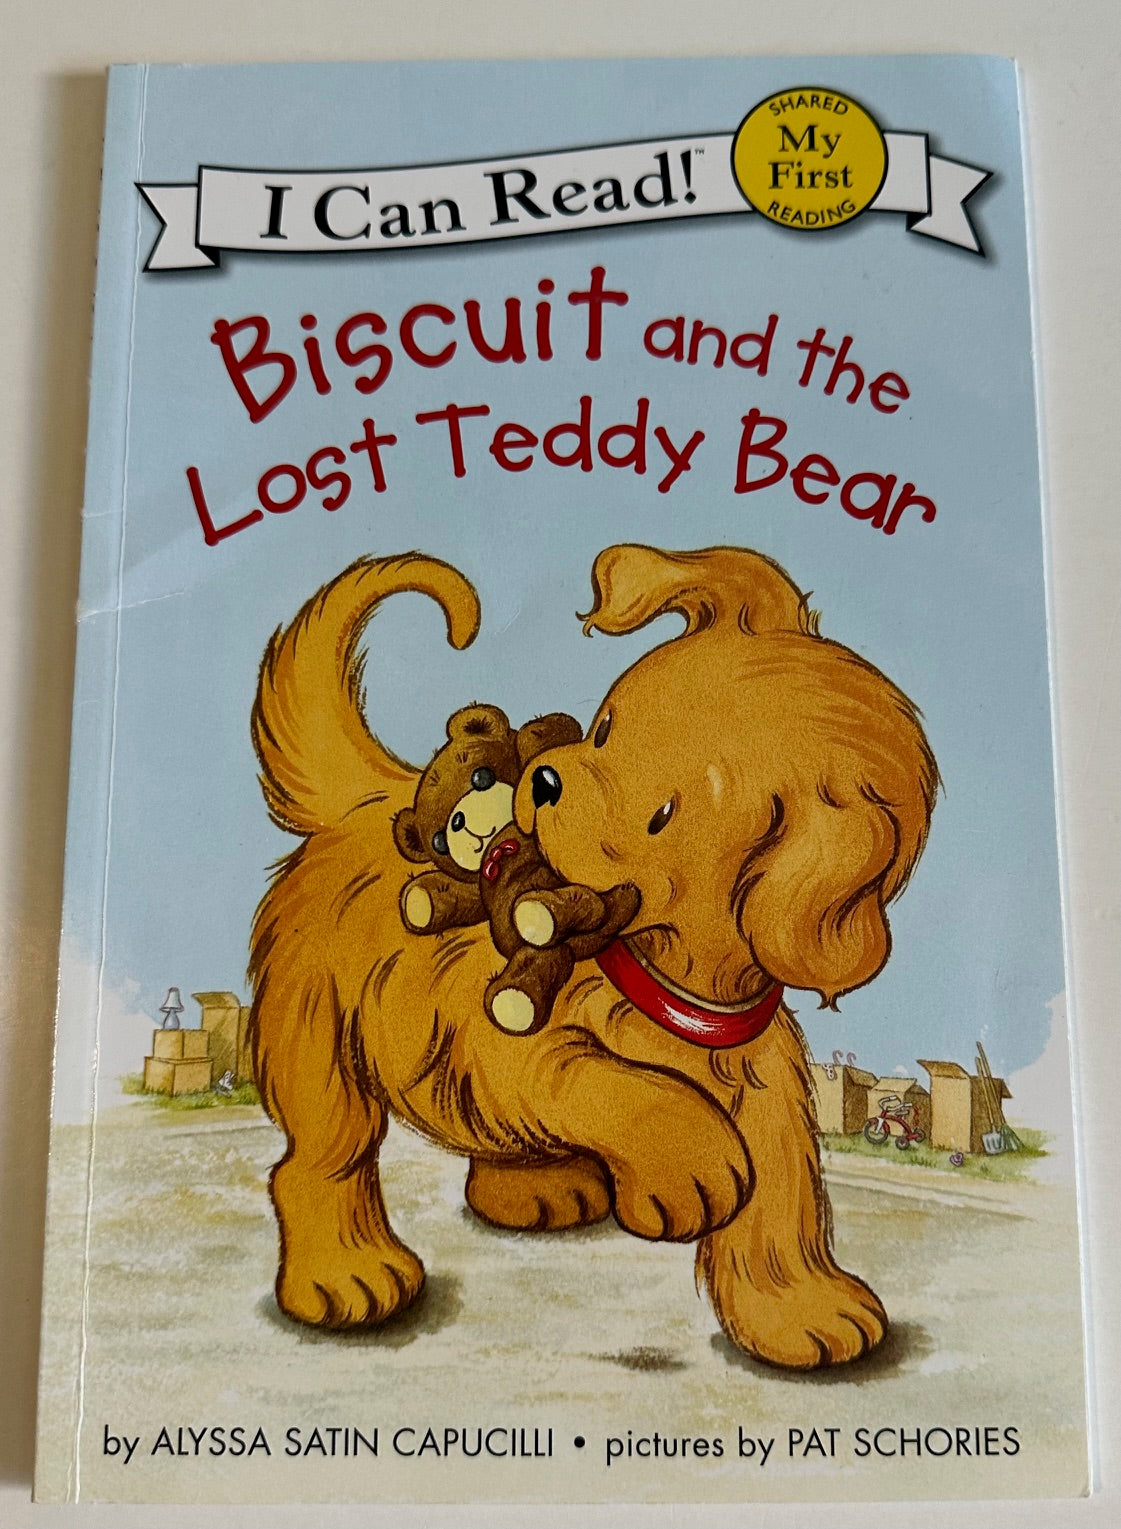 "Biscuit and the Lost Teddy Bear"